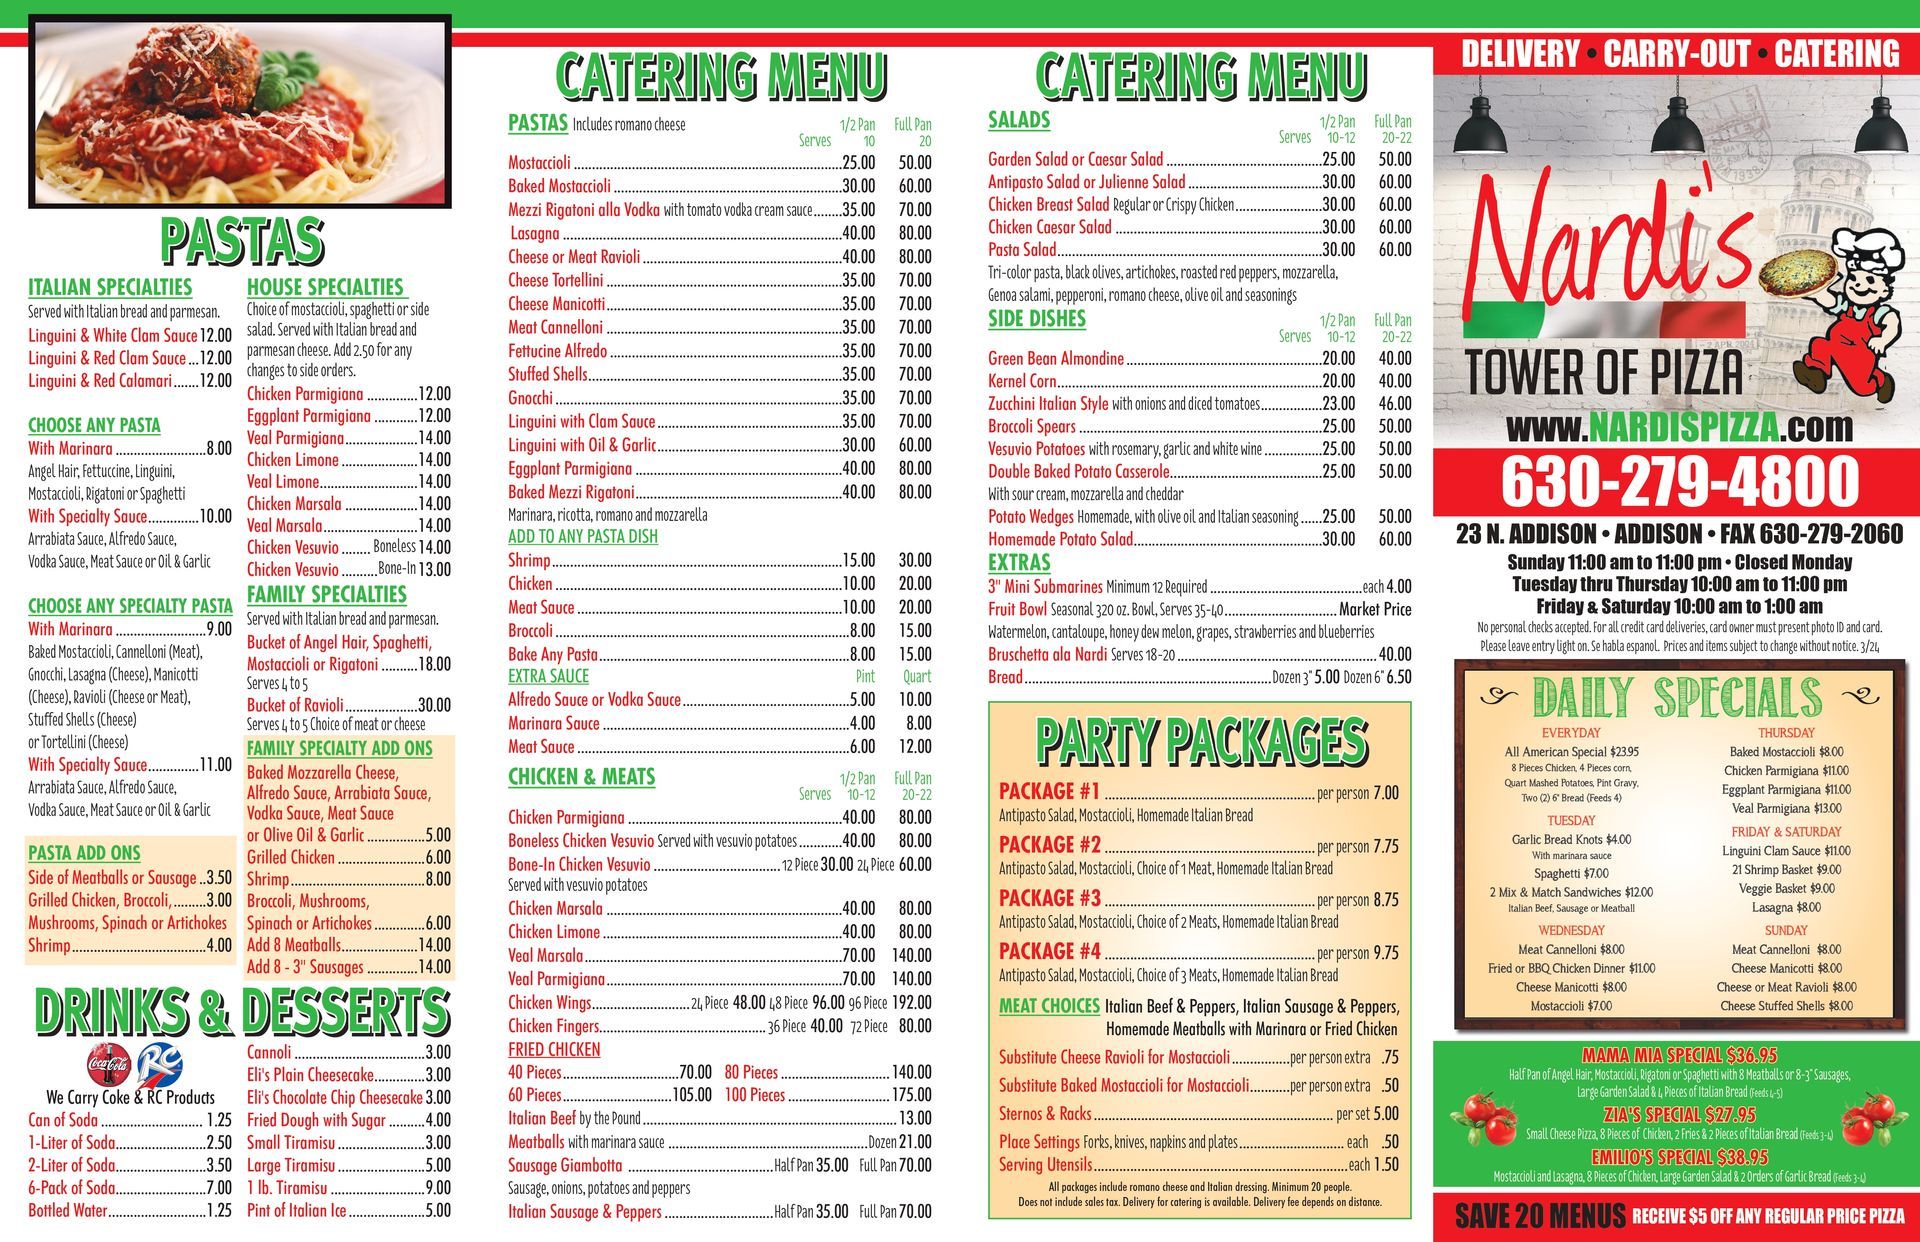 A menu for a restaurant called north 's tower of pizza